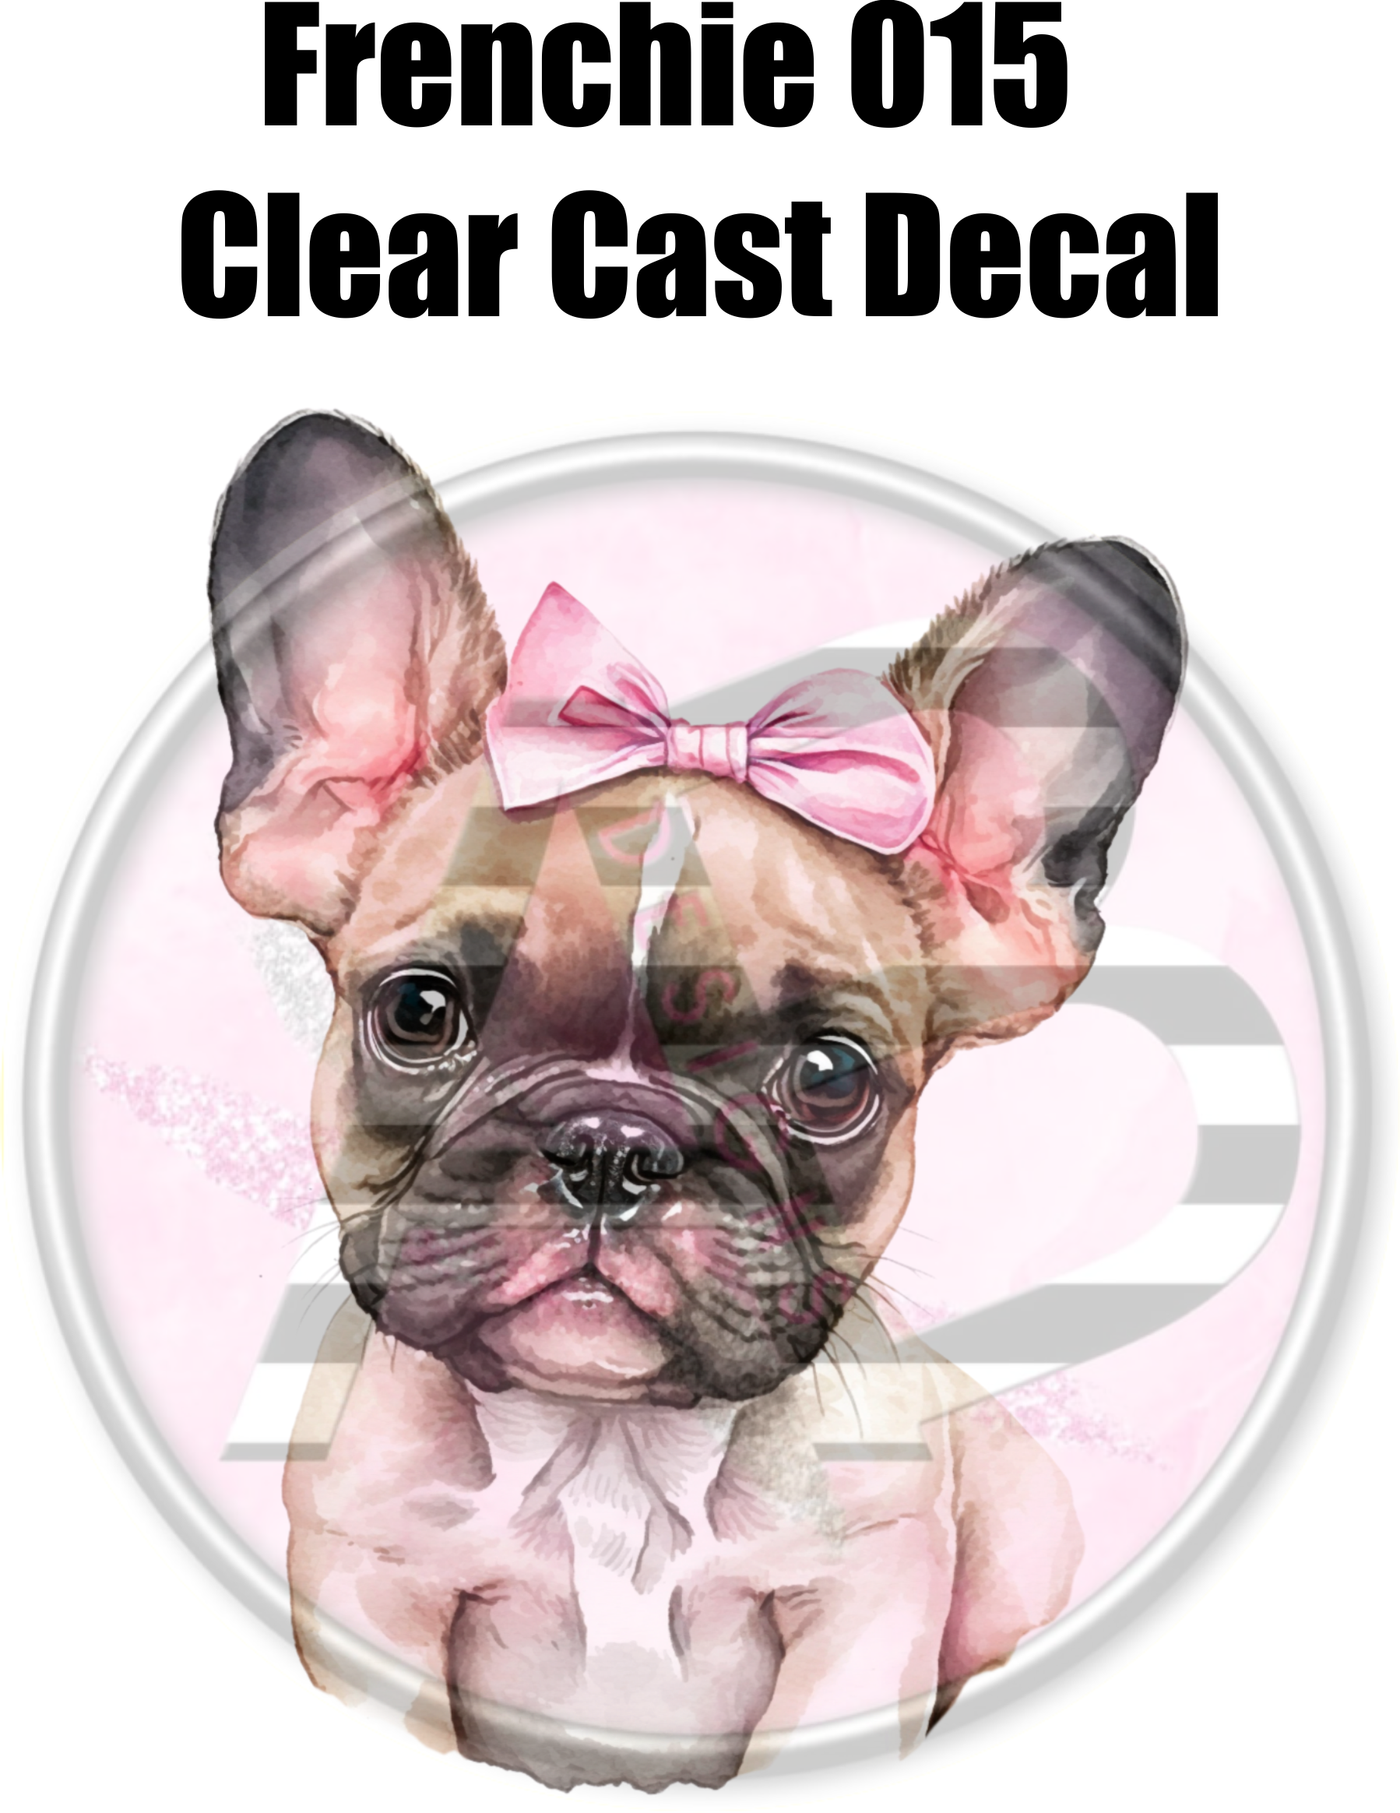 Frenchie 015 - Clear Cast Decal